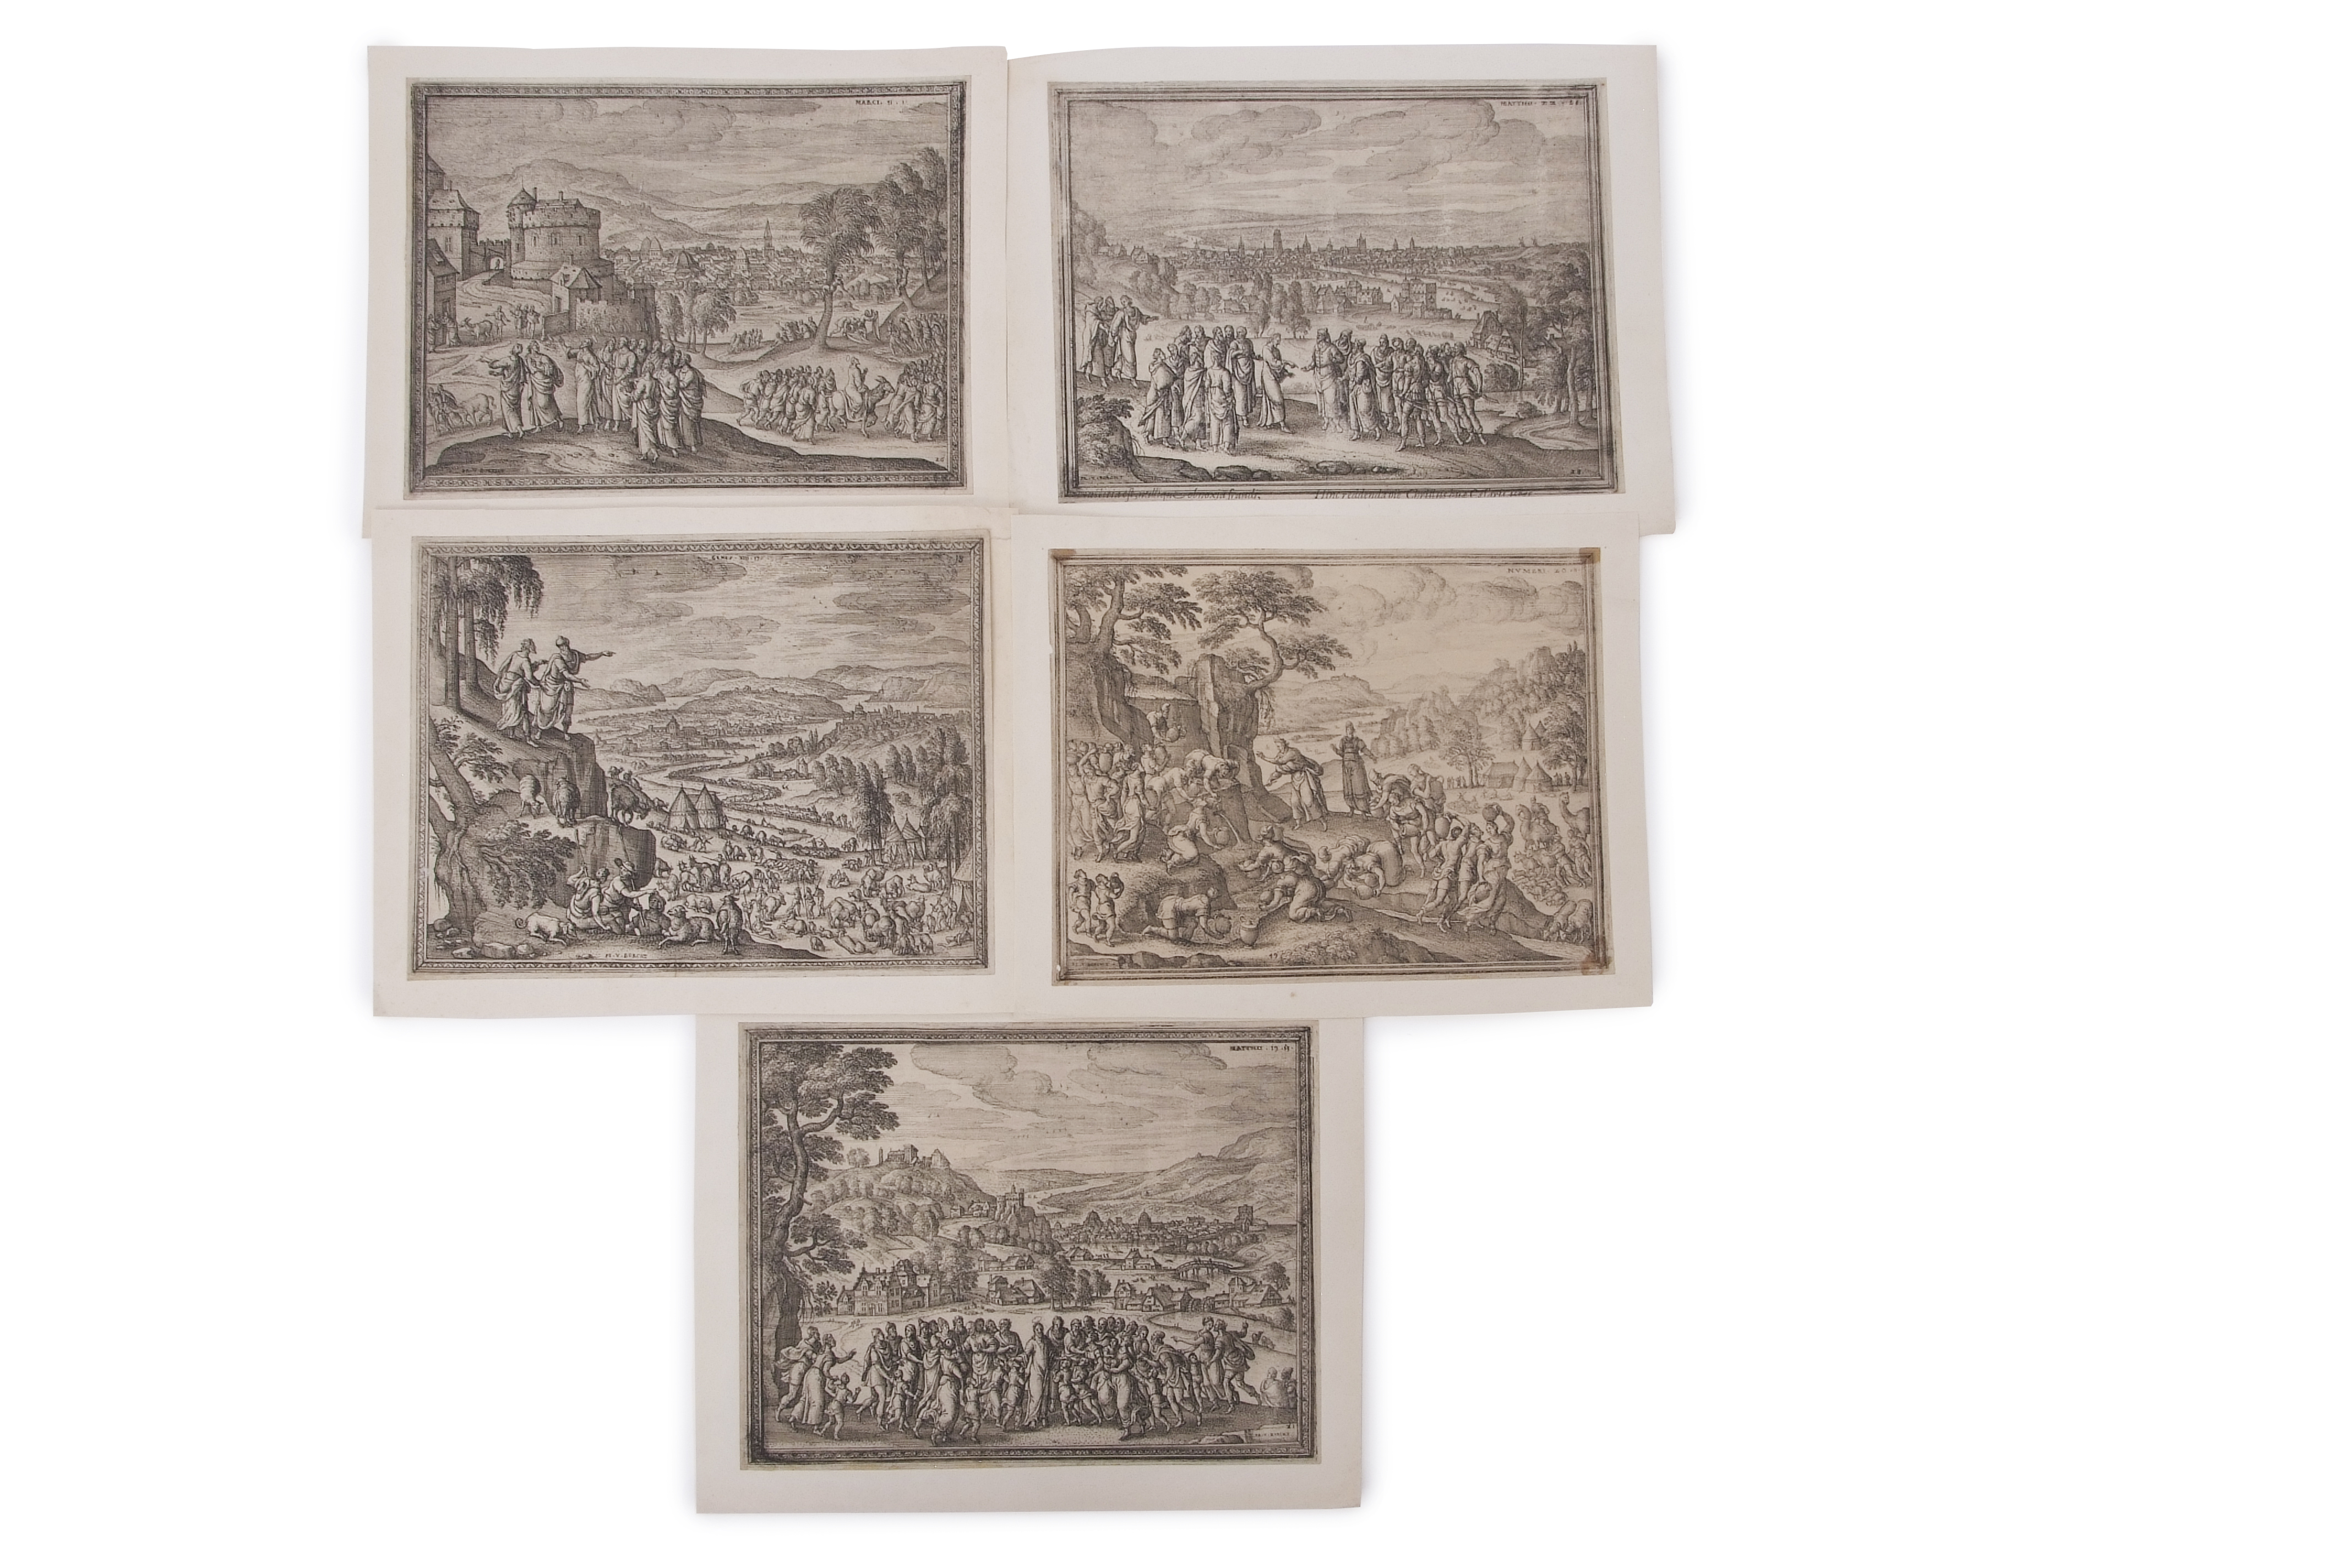 Pieter van der Borcht (1545-1608), Biblical scenes, group of five black and white etchings, 19 x